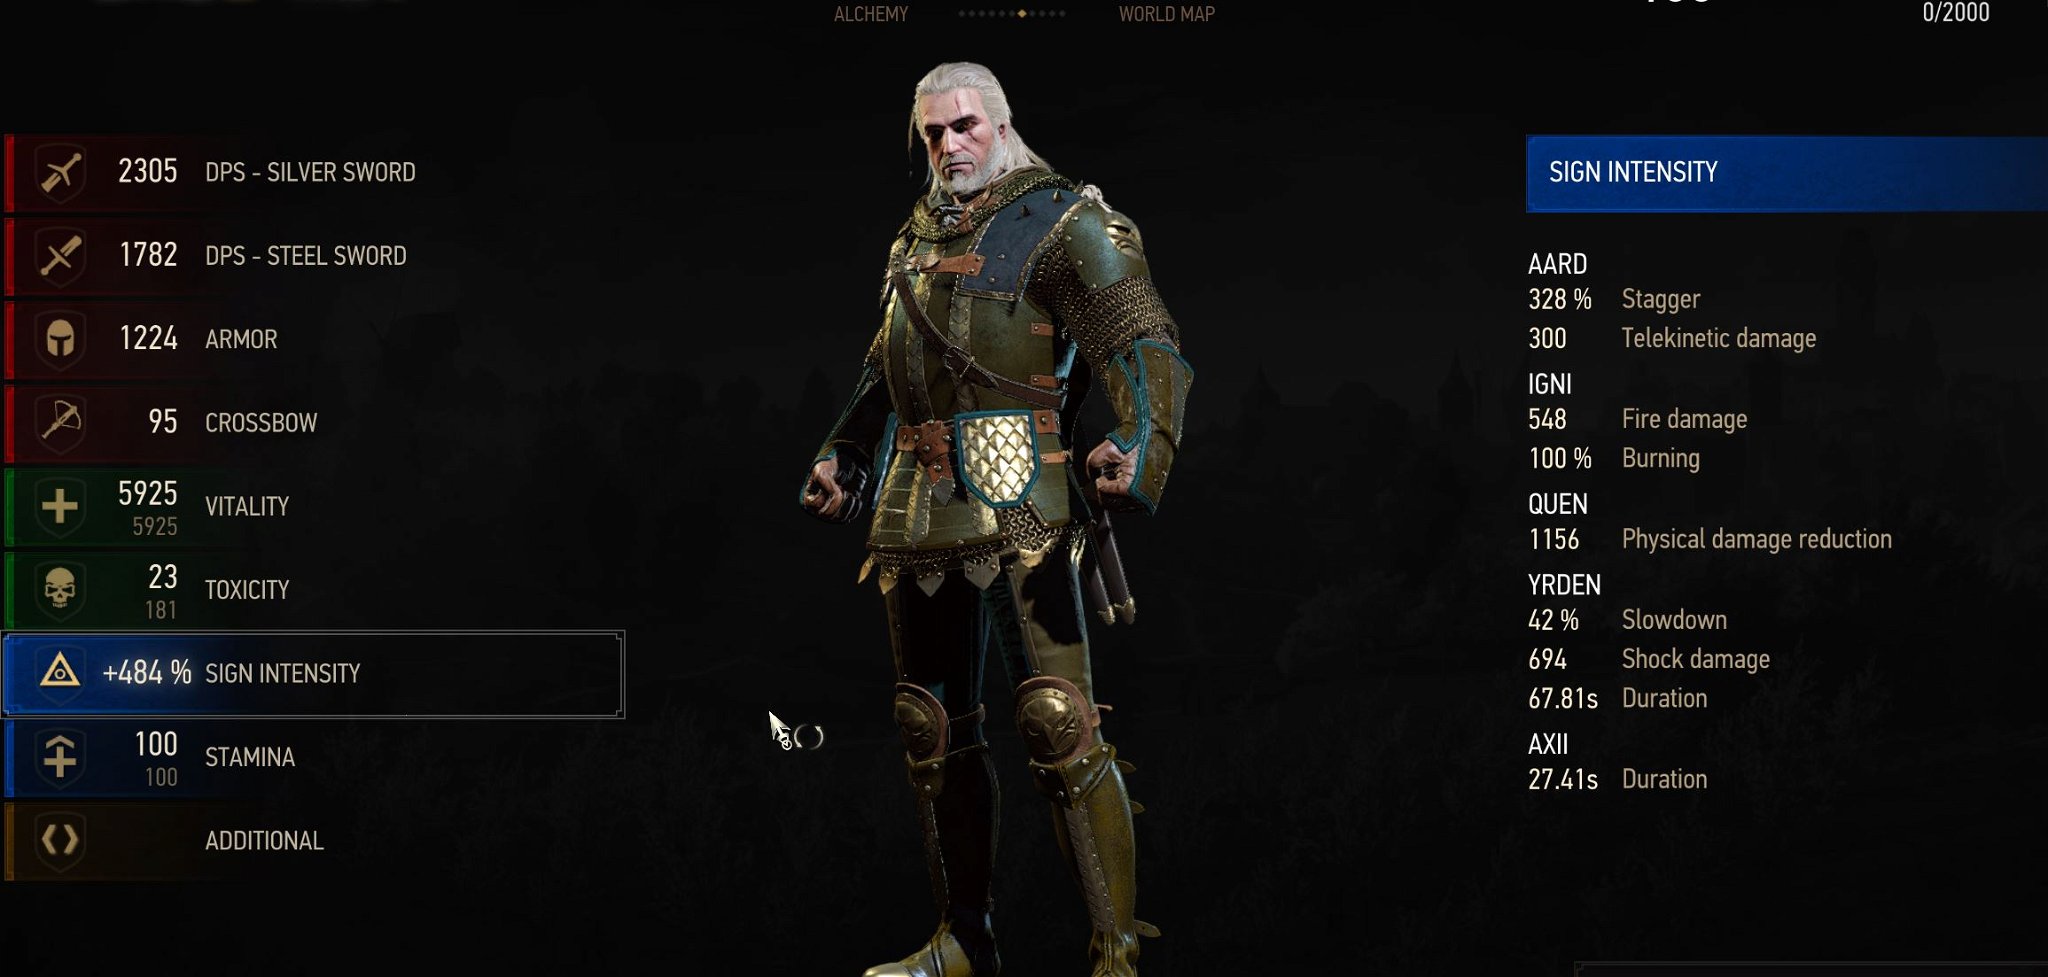 witcher 3 aard piercing cold build sign intensity